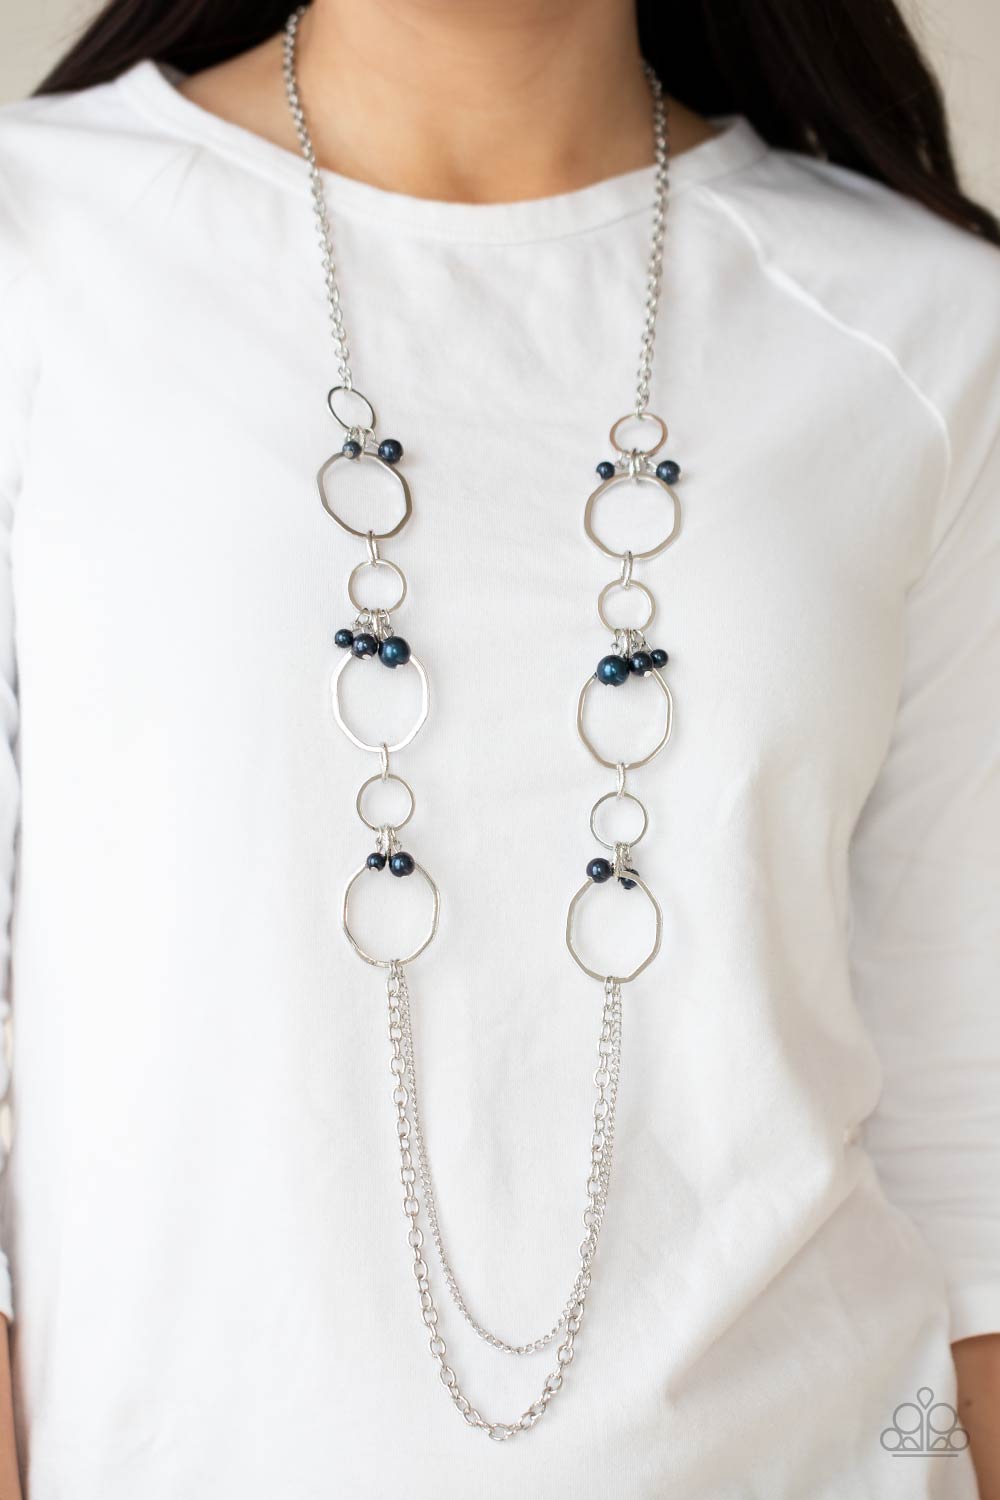 Ante UPSCALE Blue Necklace - Paparazzi Accessories- on model - CarasShop.com - $5 Jewelry by Cara Jewels